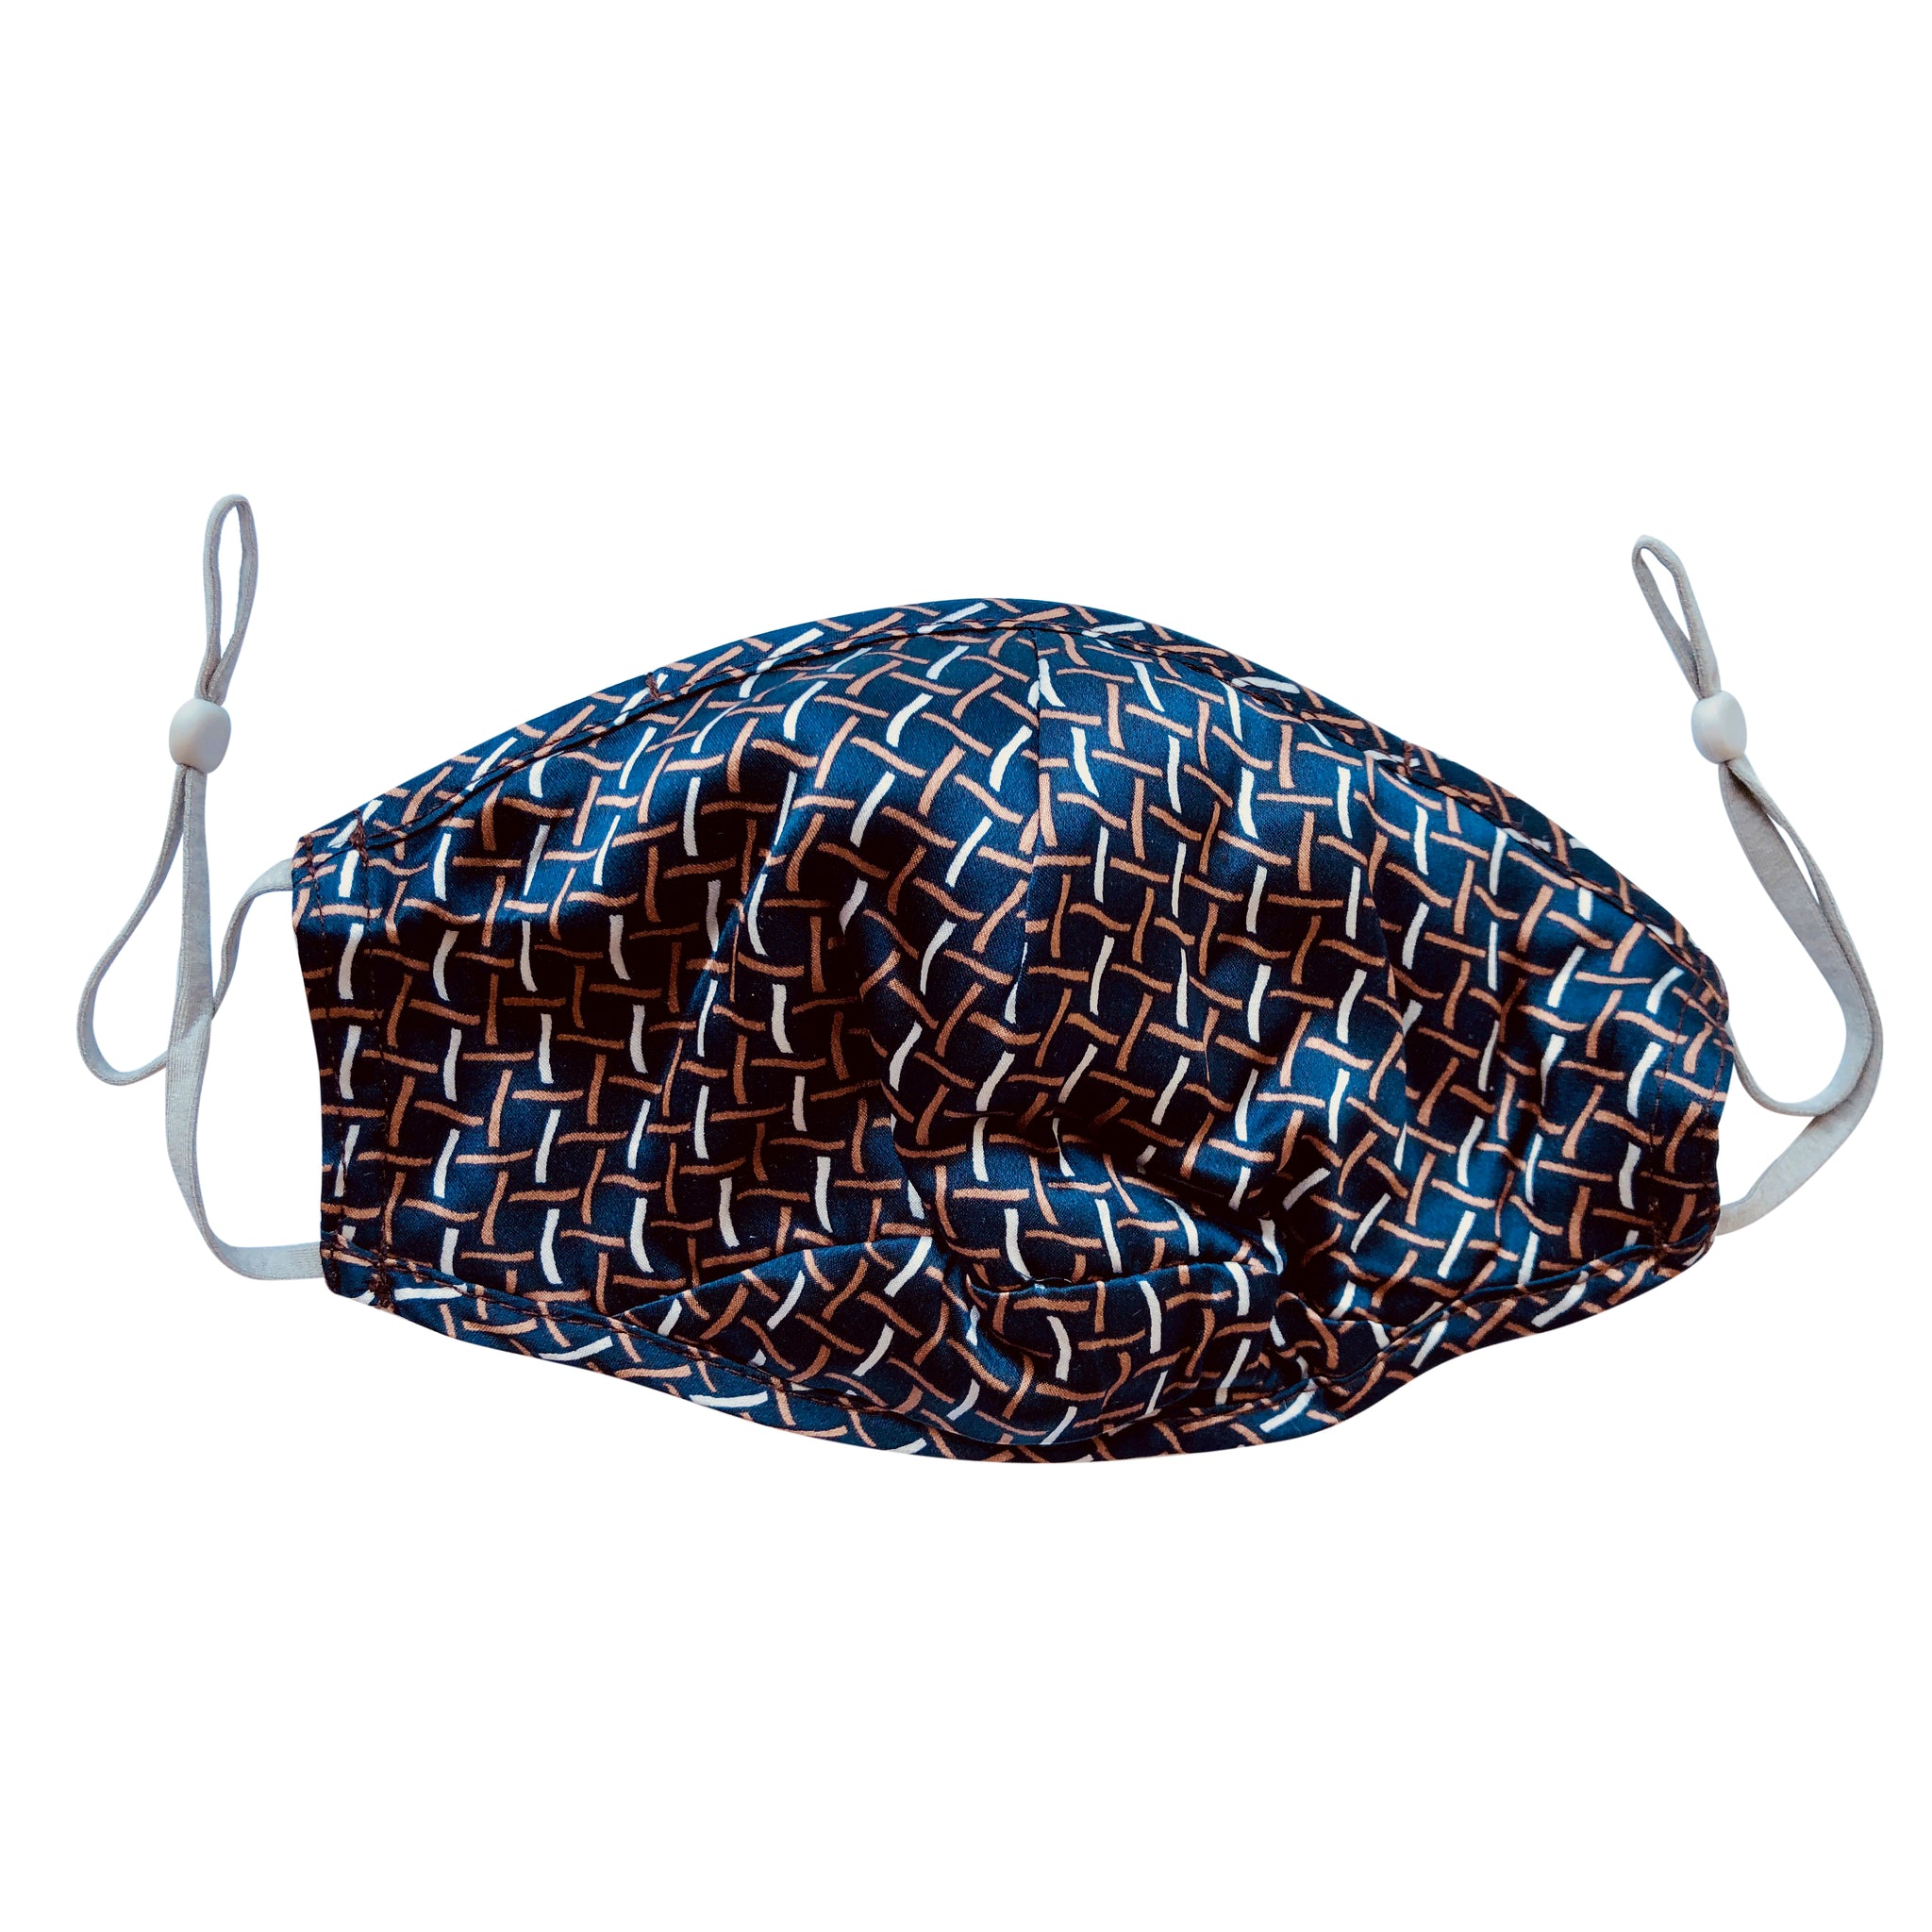 Triple Layer 100% Mulberry Silk Unisex Face Mask: The Old World - Navy Rope Pattern Silk